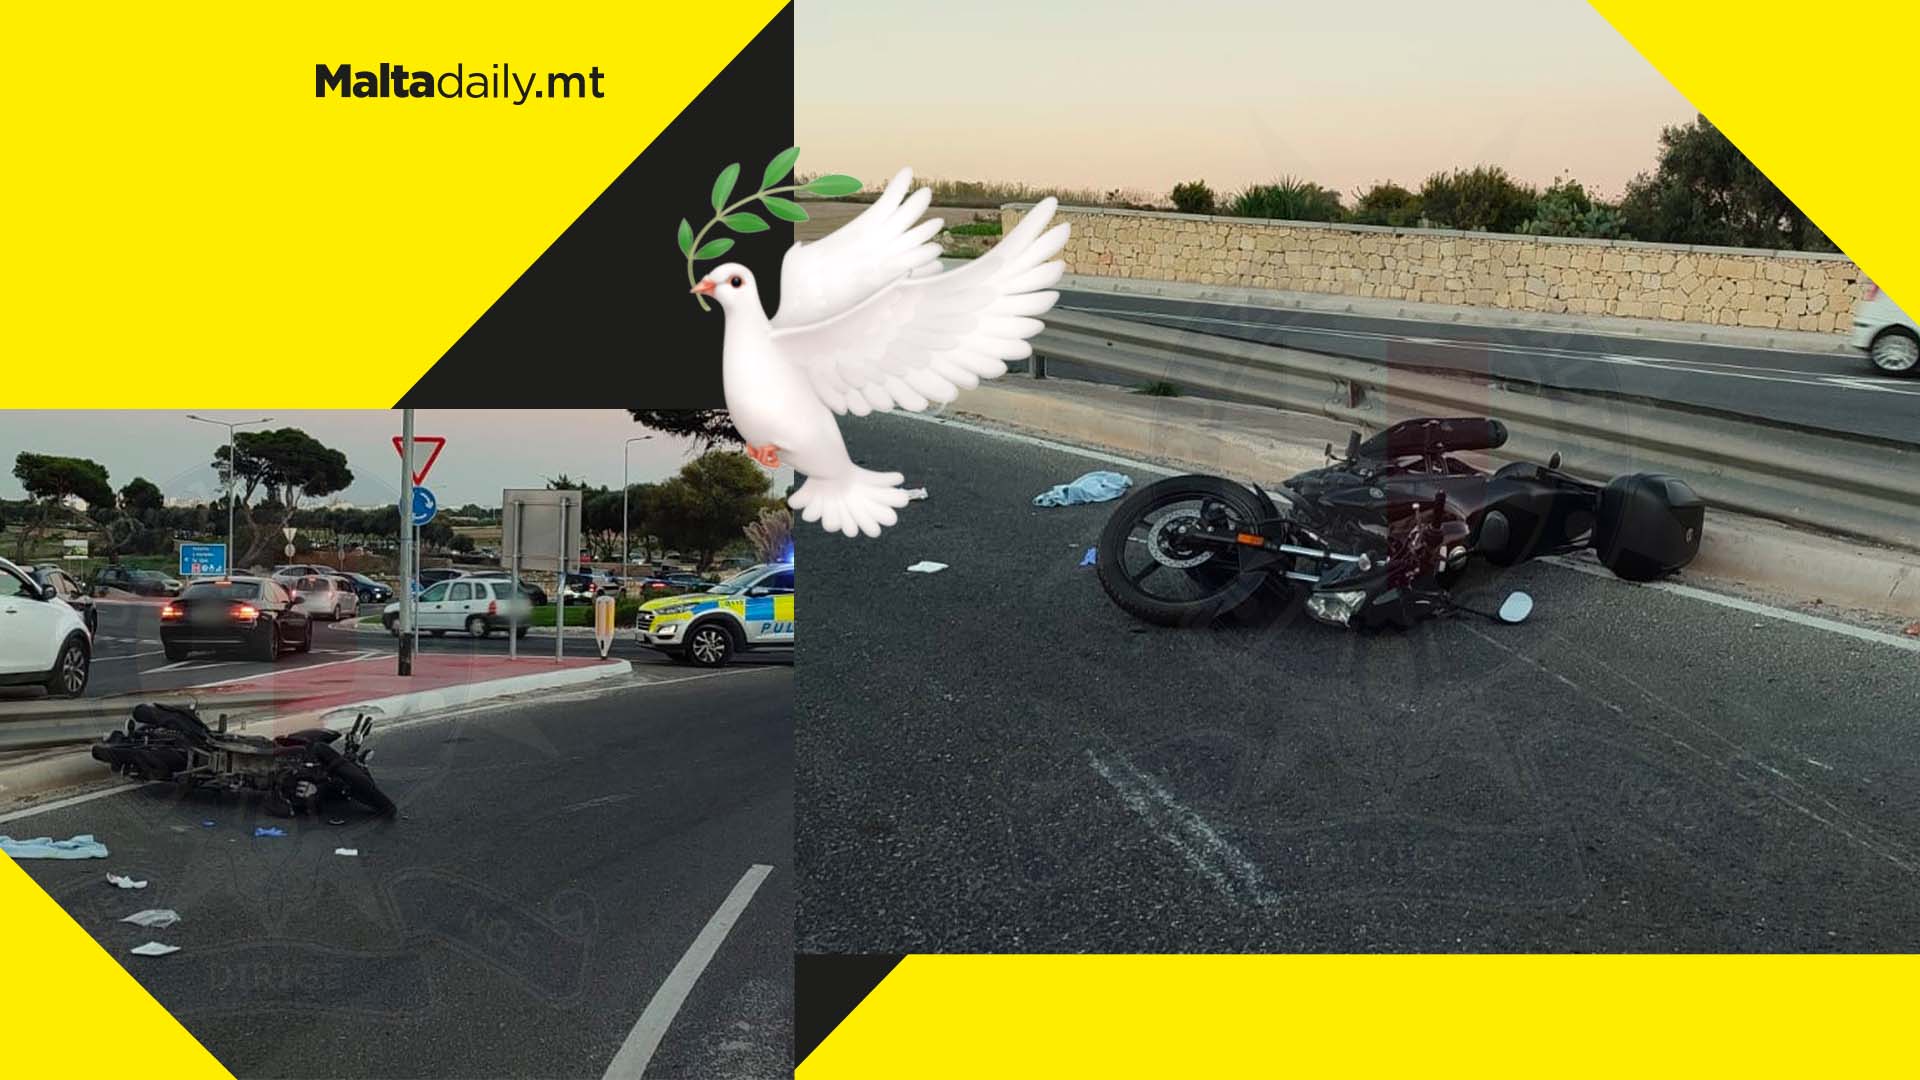 45 year old woman dies after motorcycle accident in Rabat